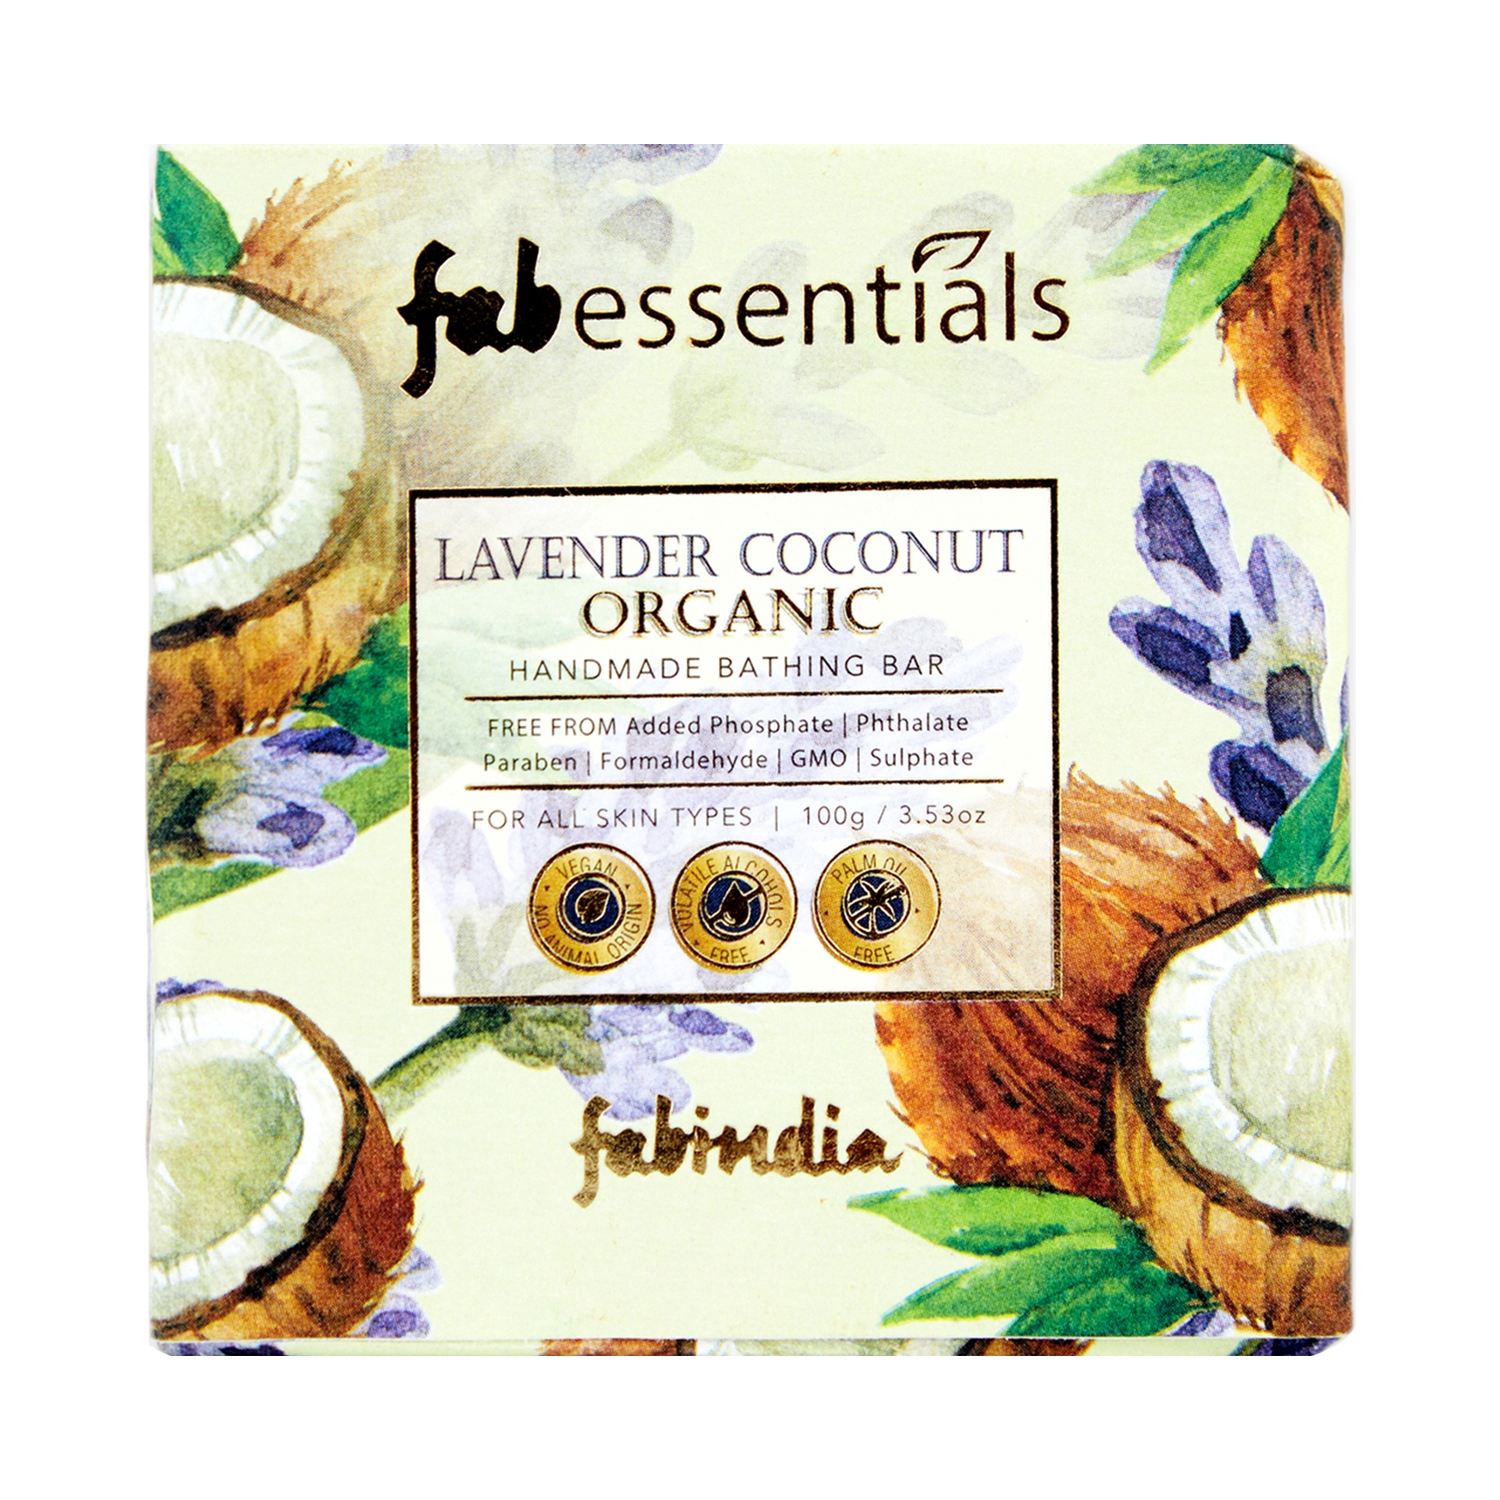 Fabessentials by Fabindia | Fabessentials by Fabindia Lavender Coconut 100% Organic Handmade Bathing Bar With Goodness Of Vitamin E (100g)